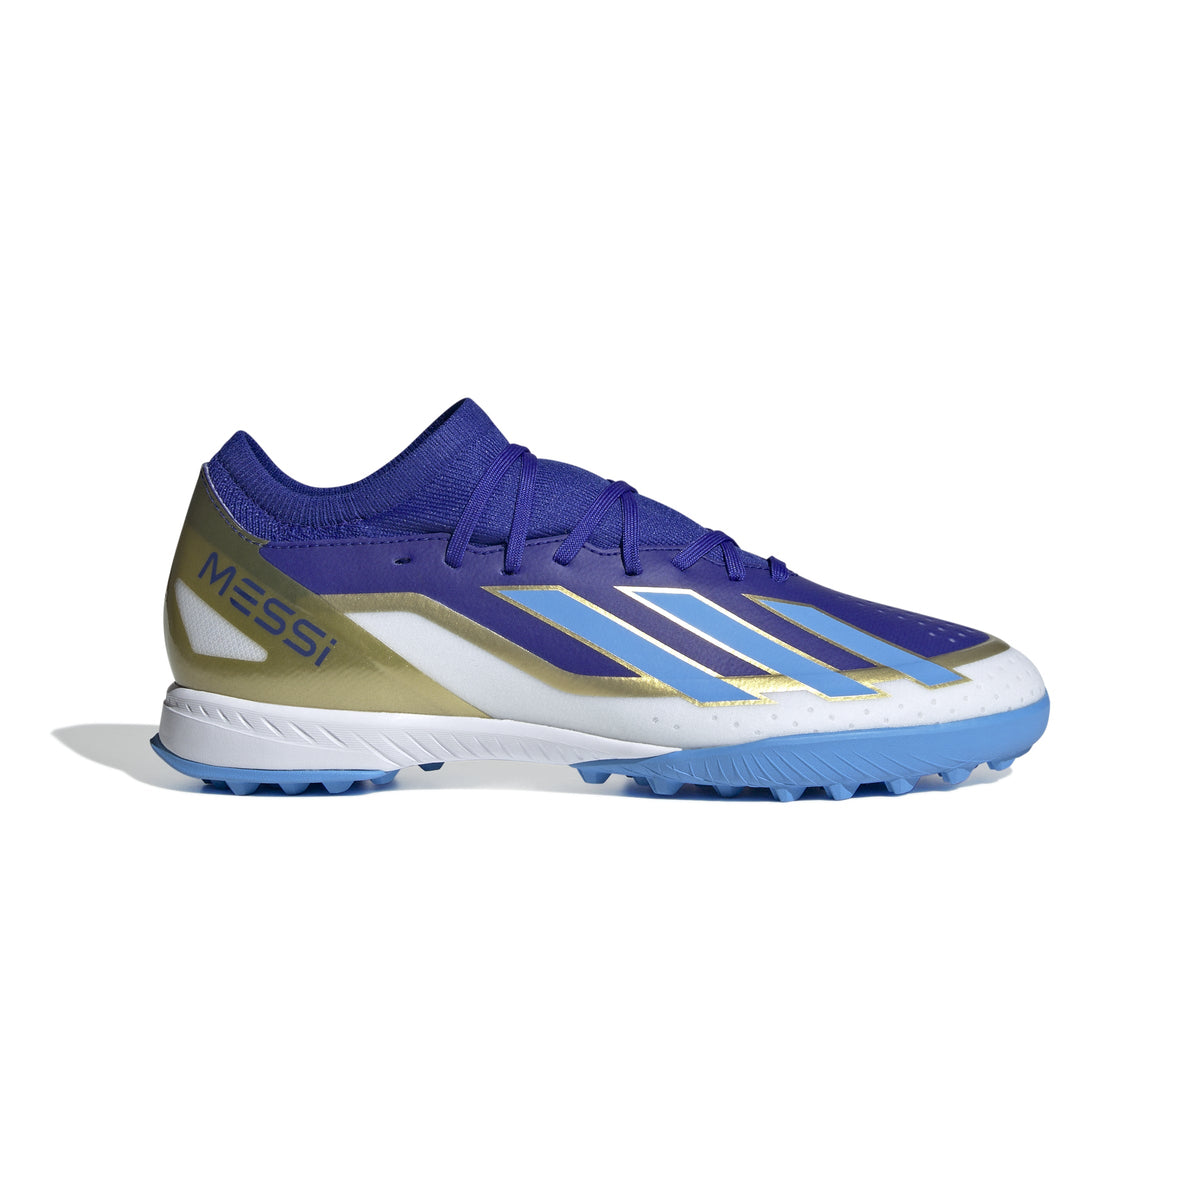 adidas Crazyfast League TF Messi Turf Shoes